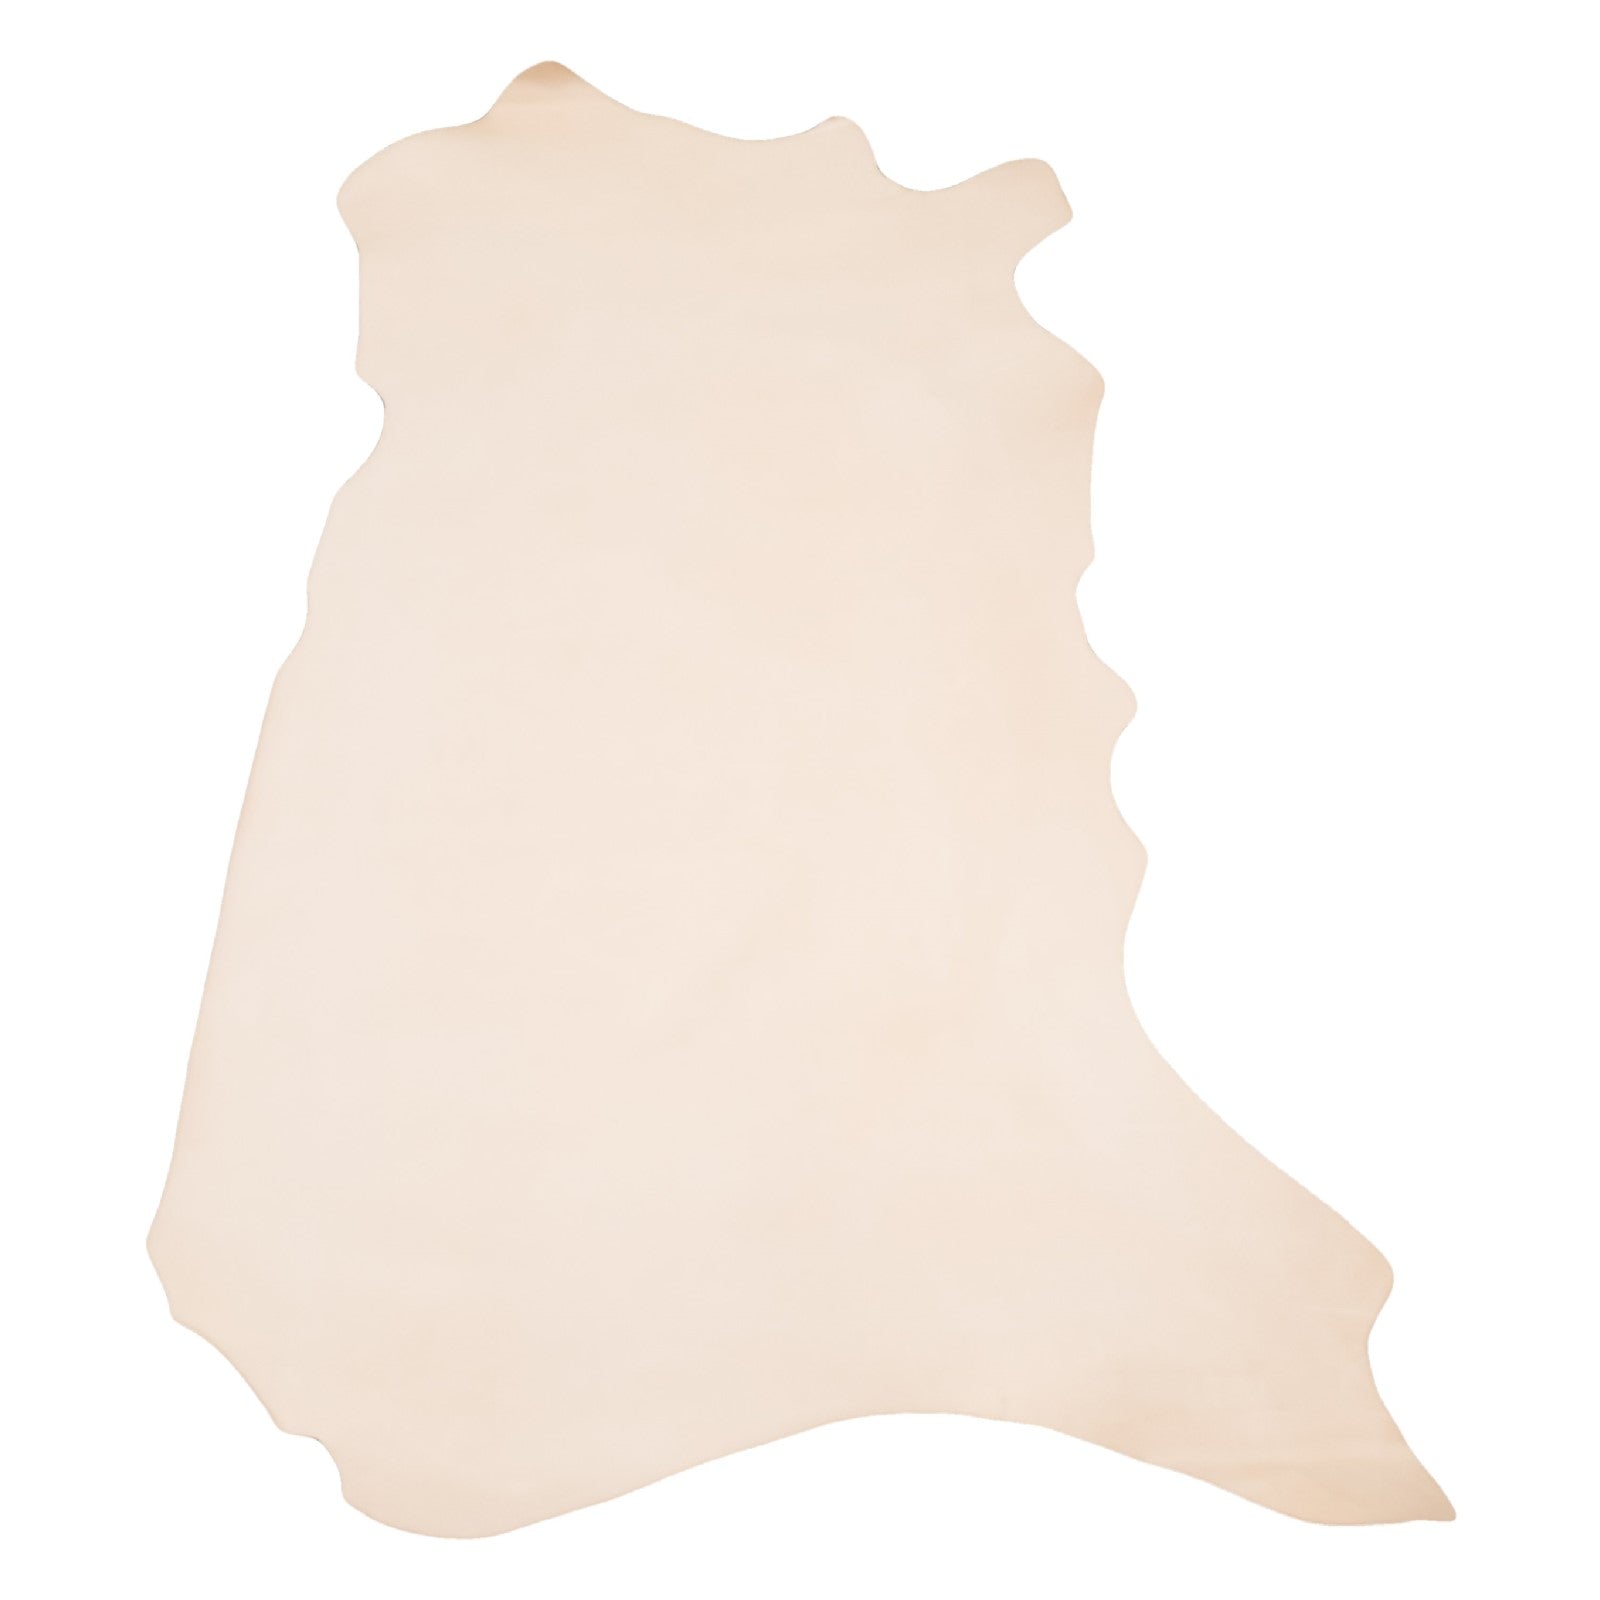 Natural, 2-3 oz, 6.5-7.5/15-35 Sq Ft Veg Tan Sides & Pieces, Artisans Choice, 18-20 / Side | The Leather Guy